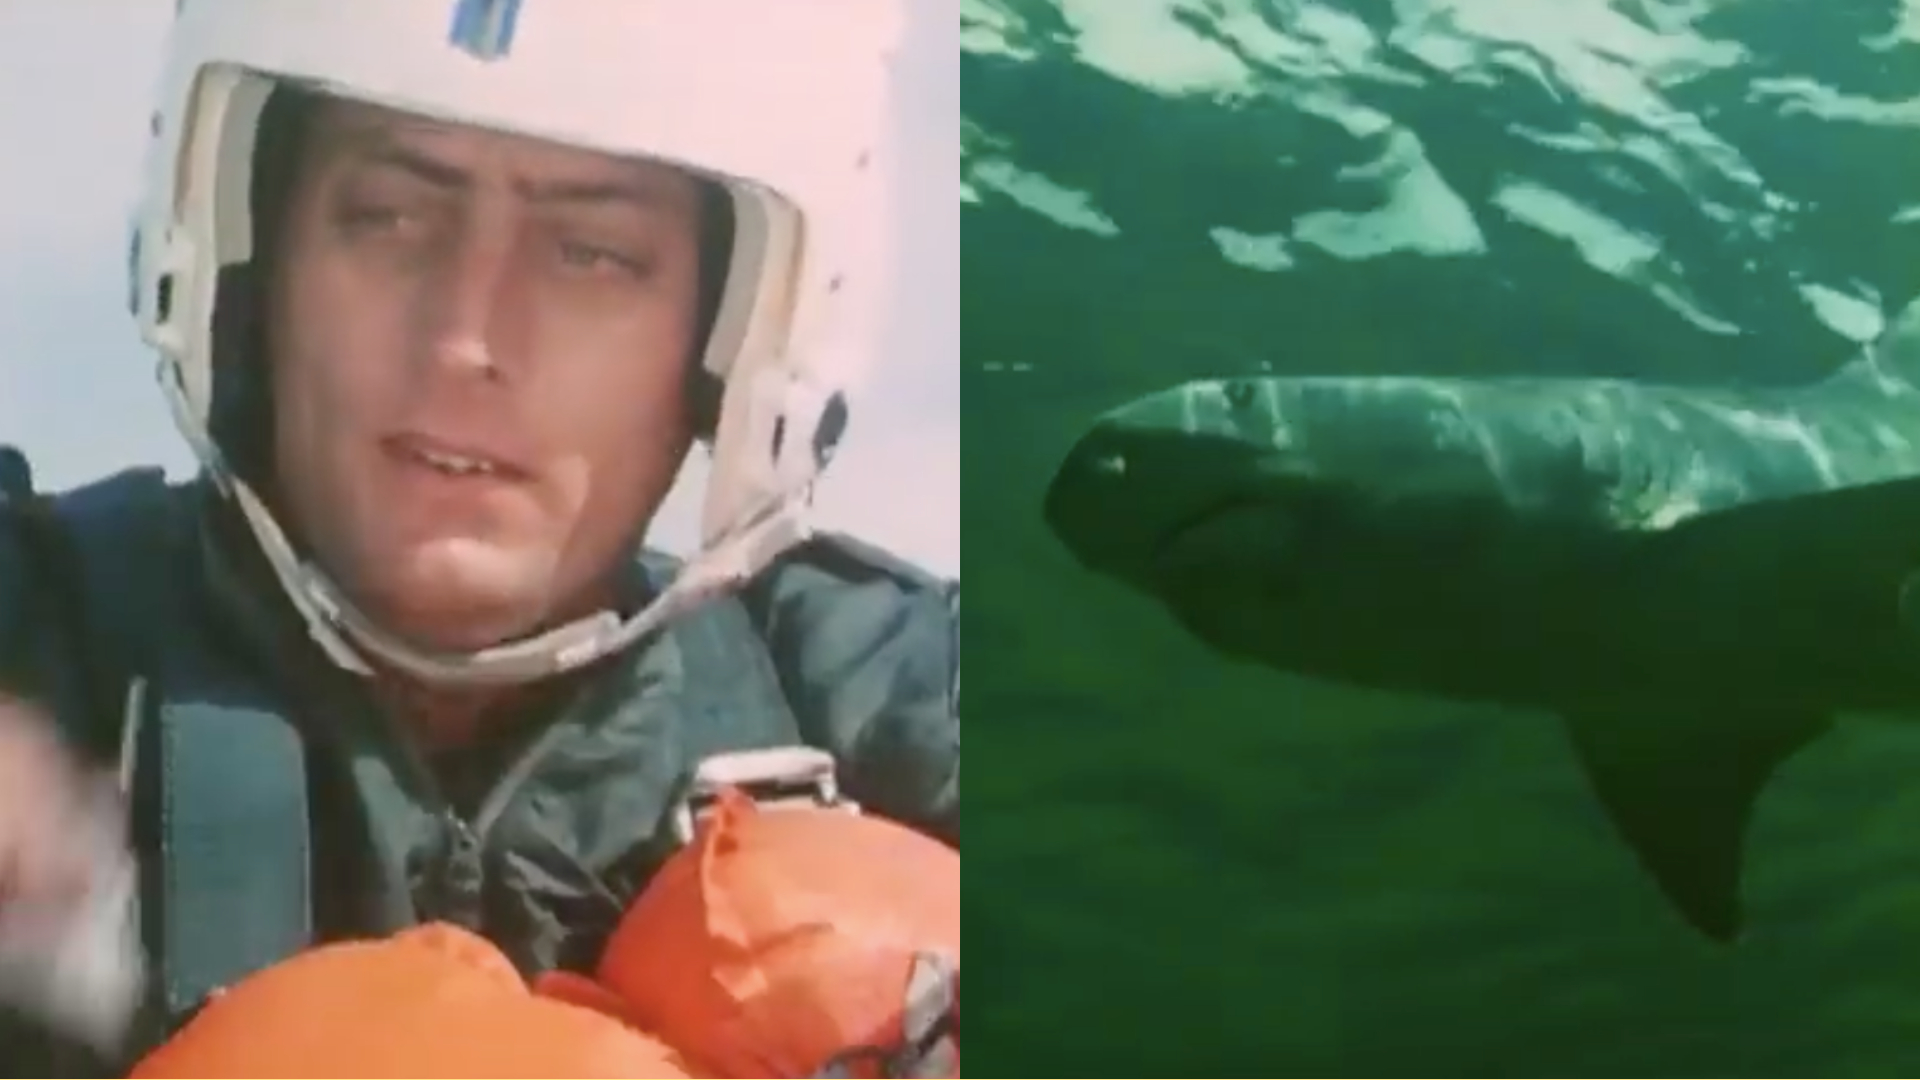 What a silly 1964 Air Force video gets wrong (and right) about sharks